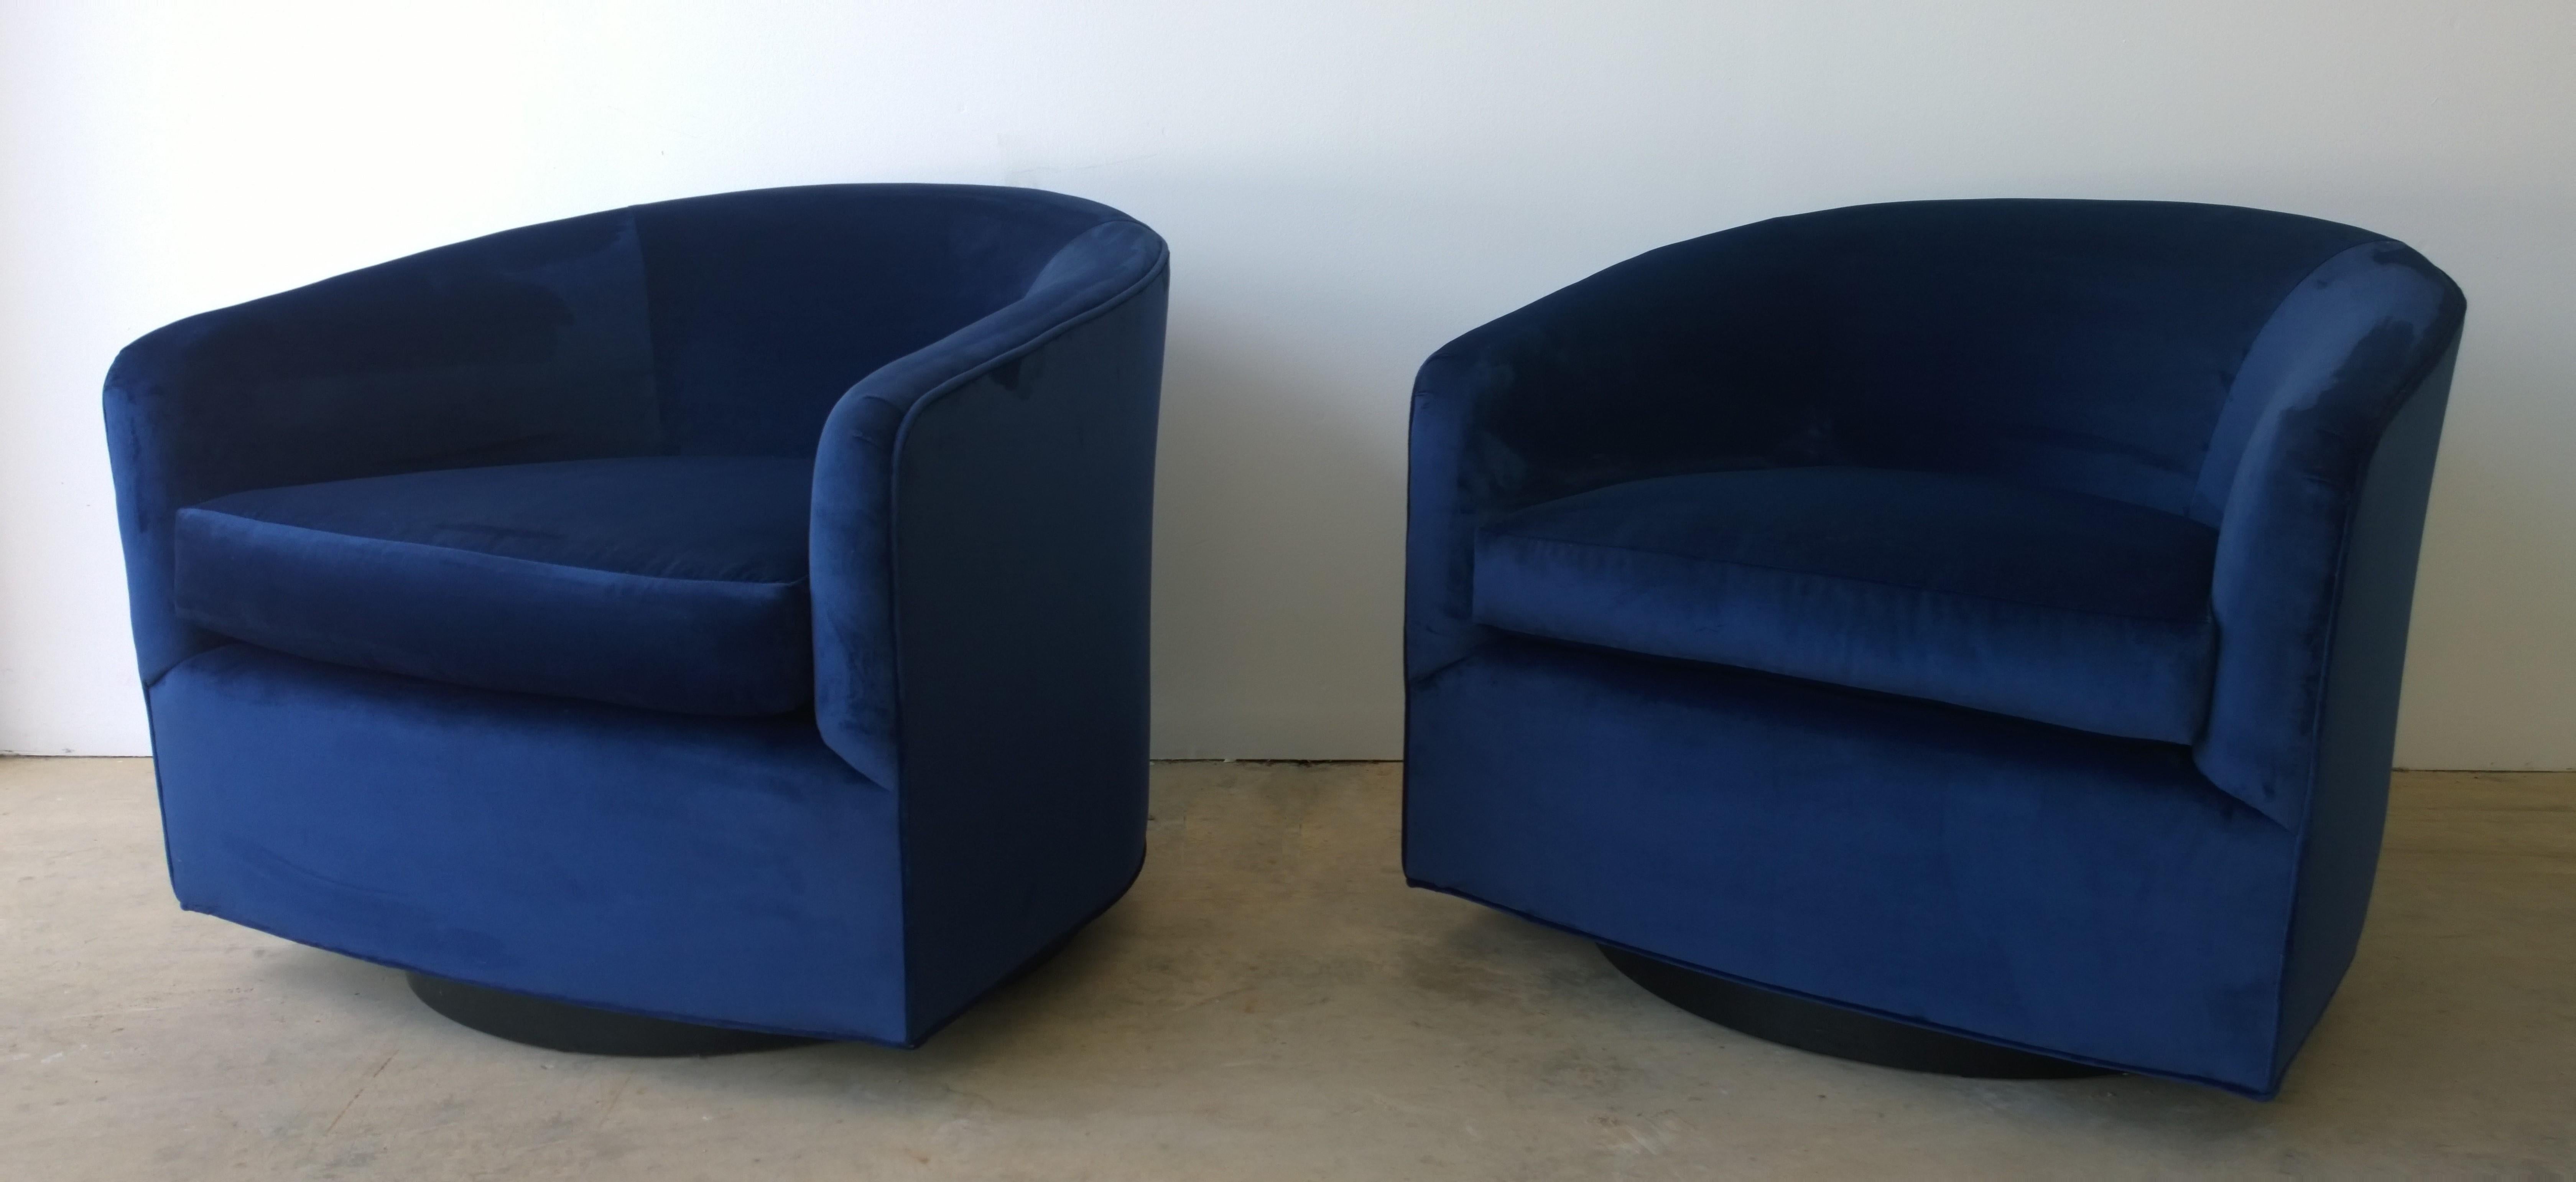 Offered is a pair of Mid-Century Modern Milo Baughman style swivel chairs with ebony wood veneer base upholstered in a new sapphire blue cotton velvet. This pair of swivel chairs exudes luxury in style, material and color. The comfort and proportion